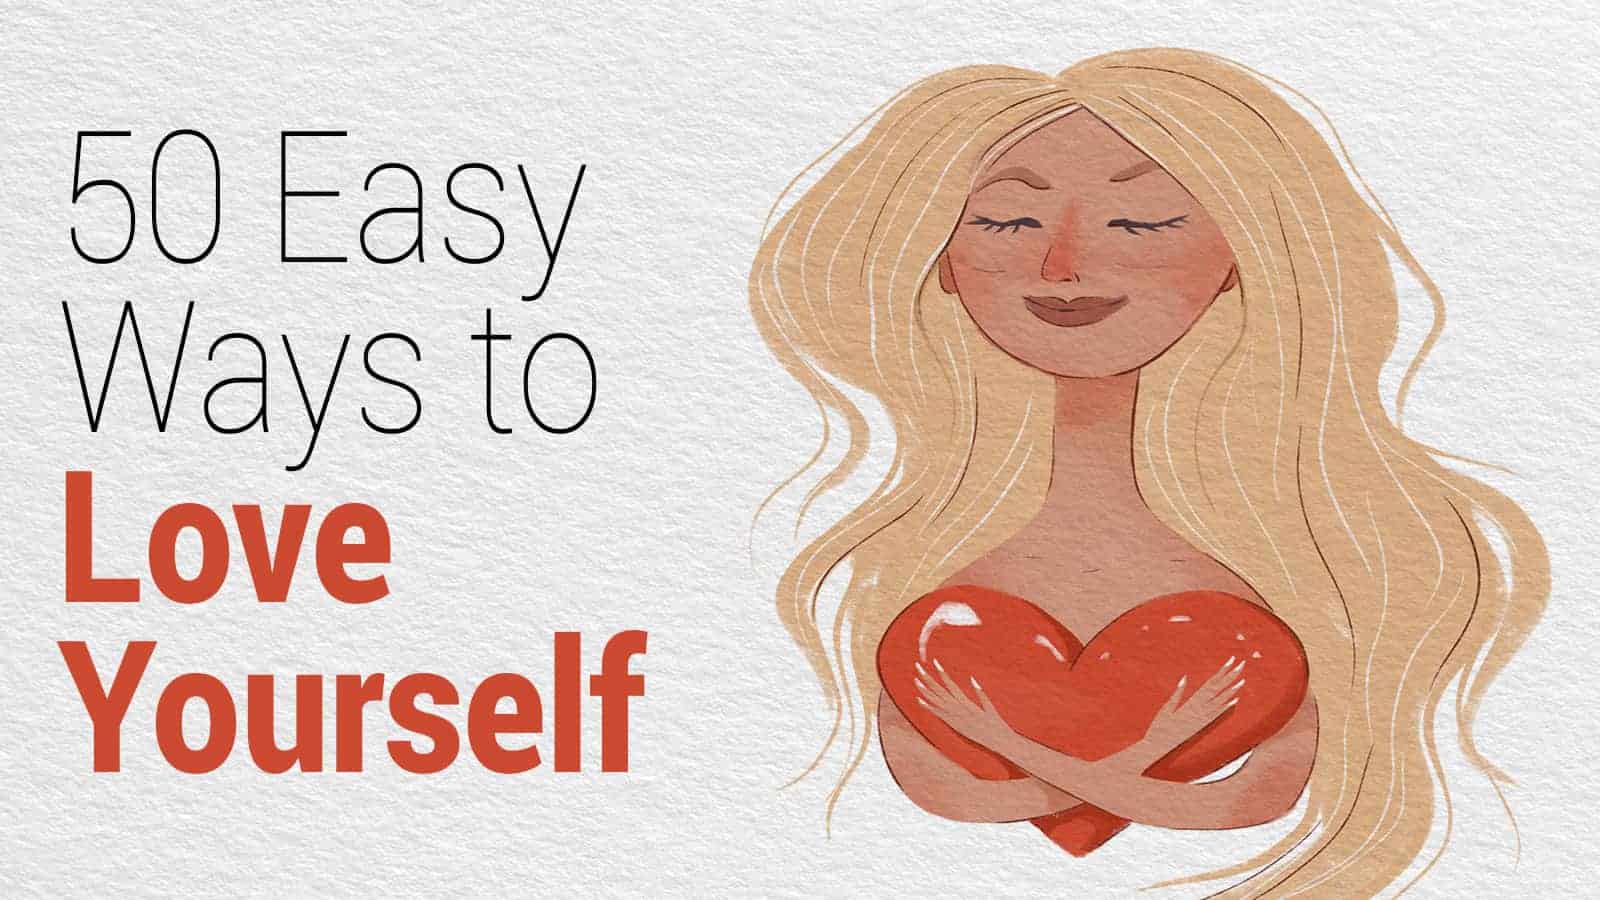 50 Easy Ways to Love Yourself